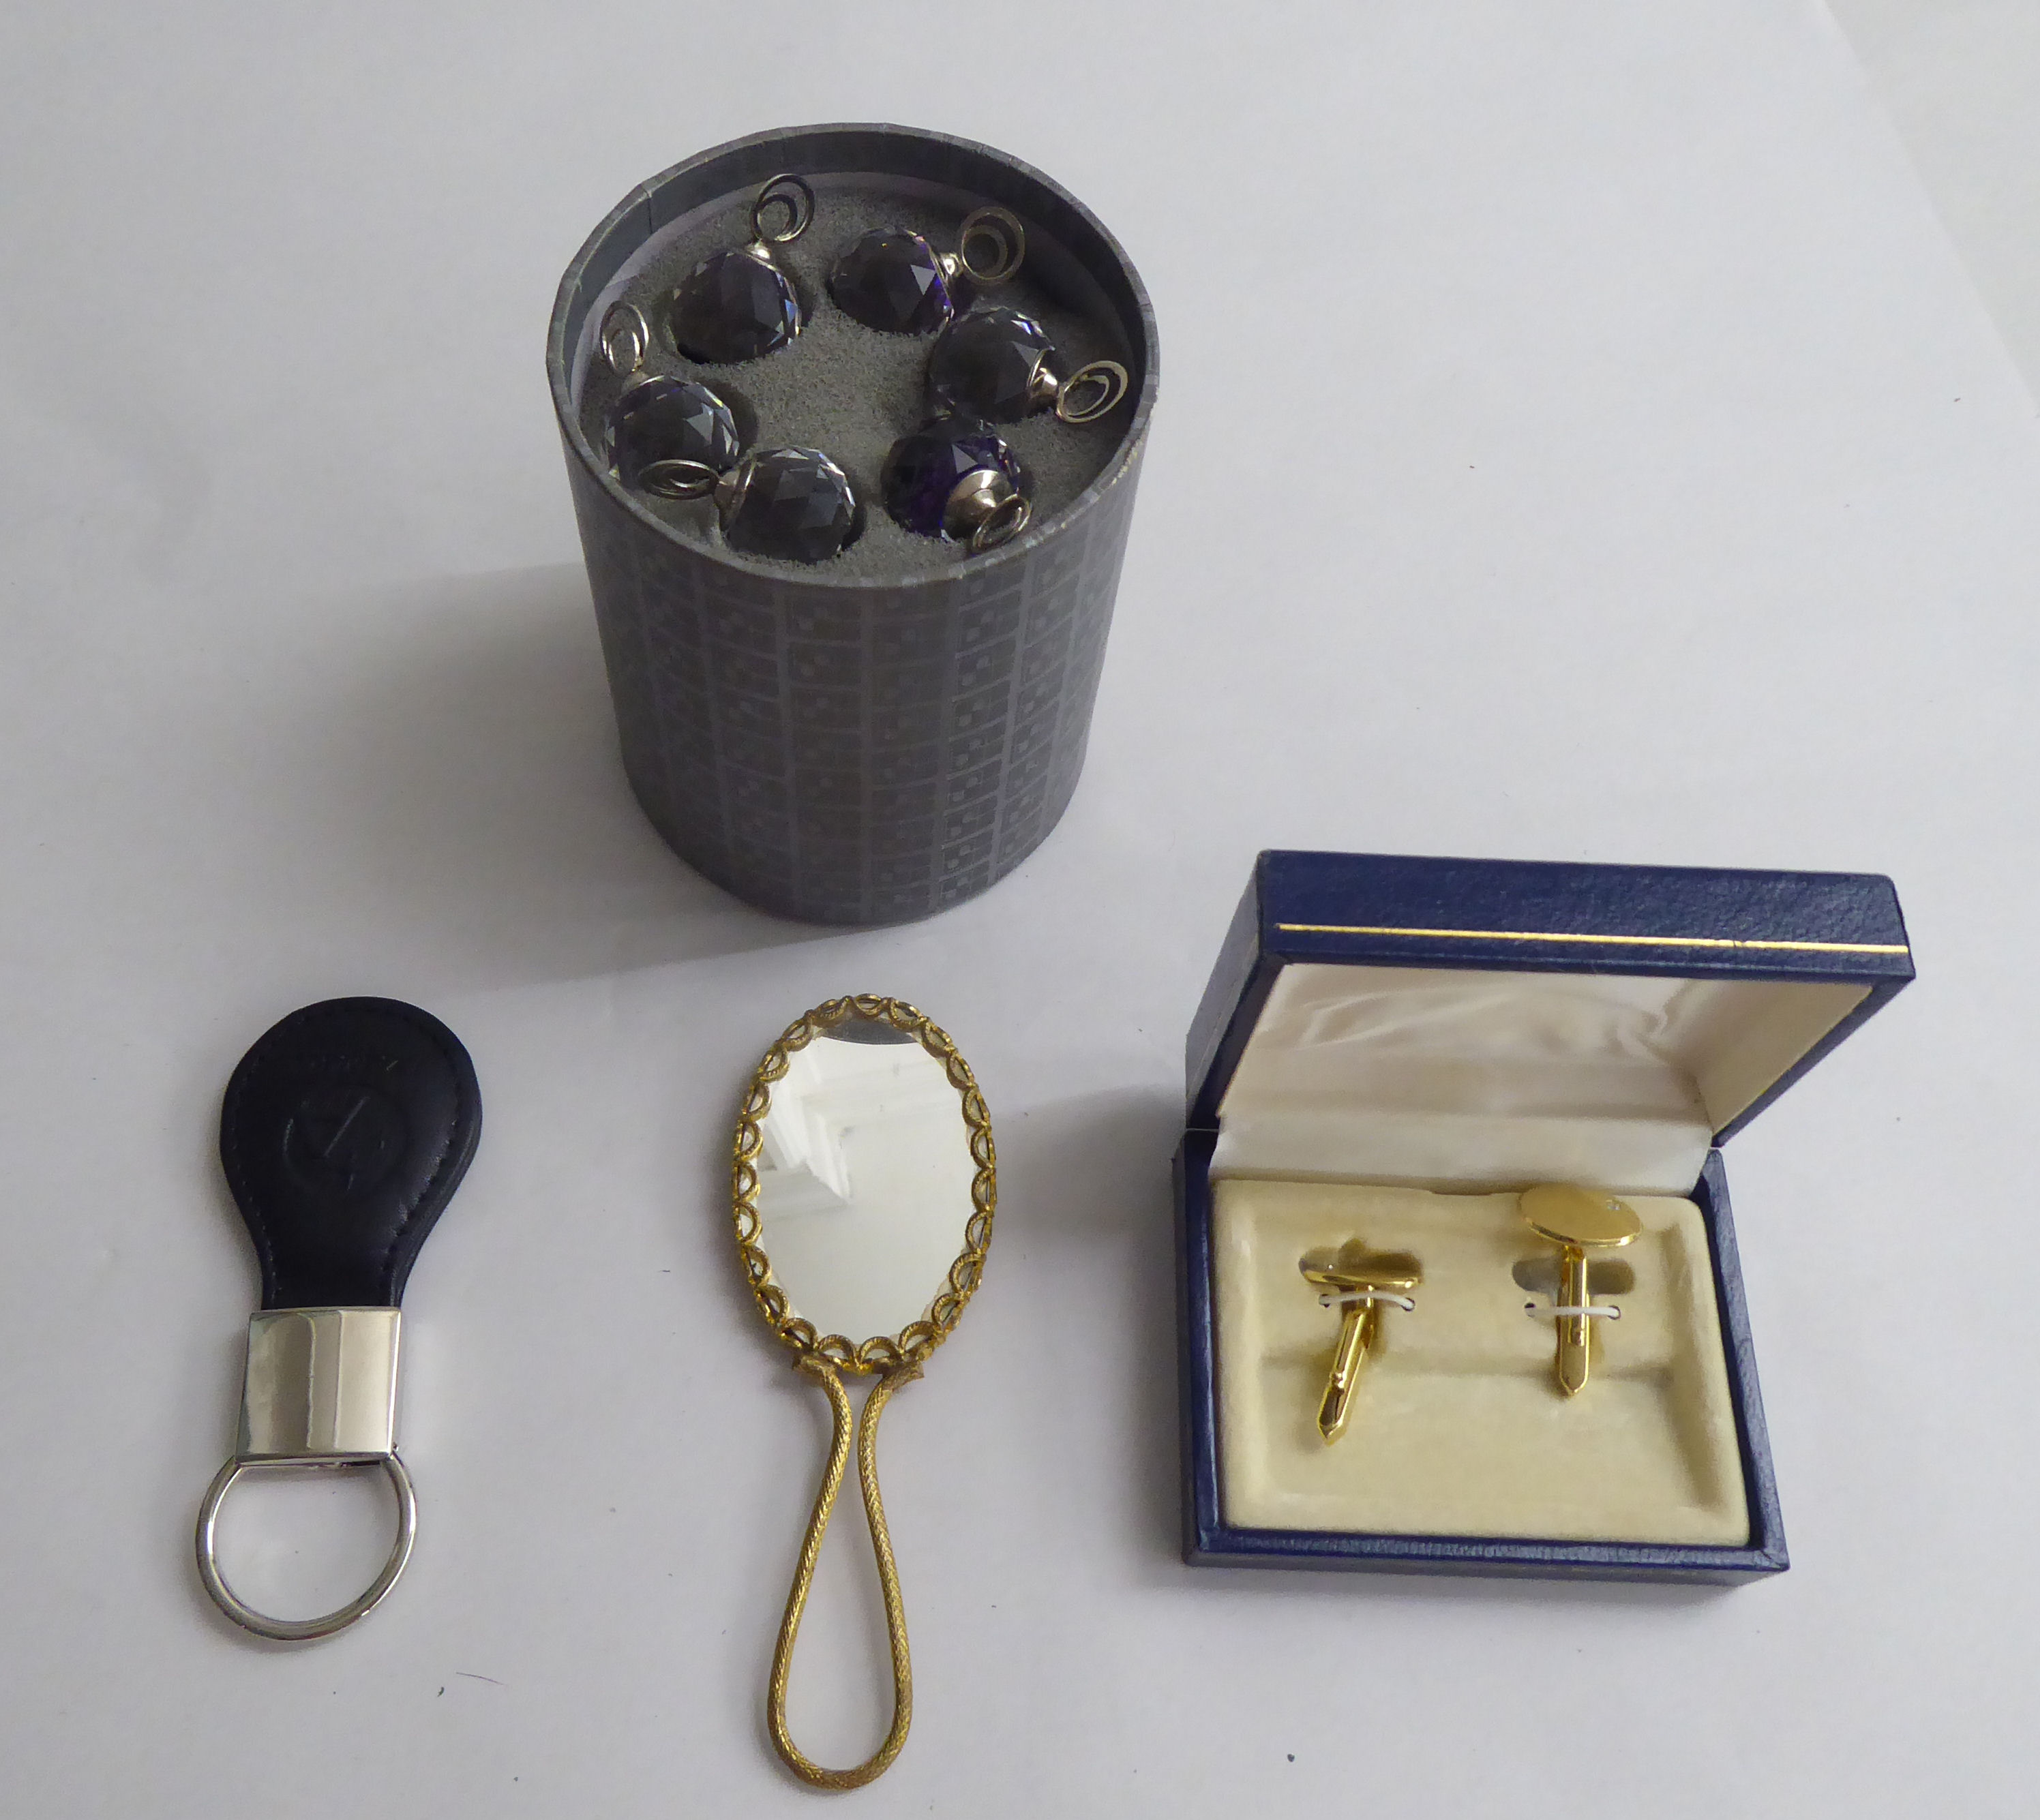 Costume jewellery and items of personal ornament: to include earrings and necklaces - Image 8 of 8